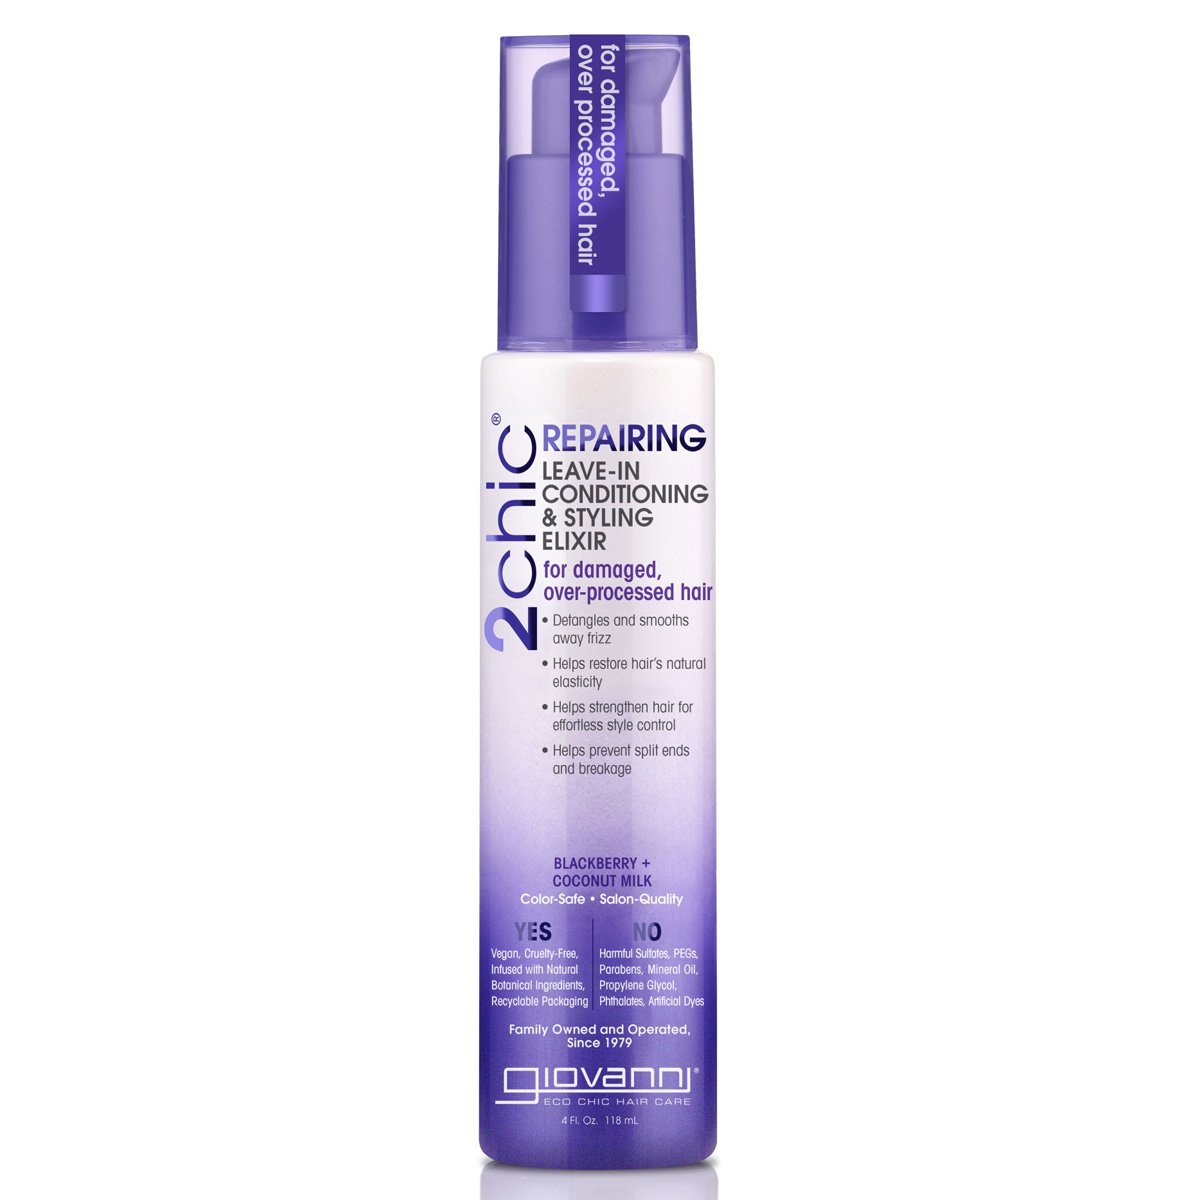 Giovanni 2chic Repairing Leave in Conditioning & Styling Elixir 118ml